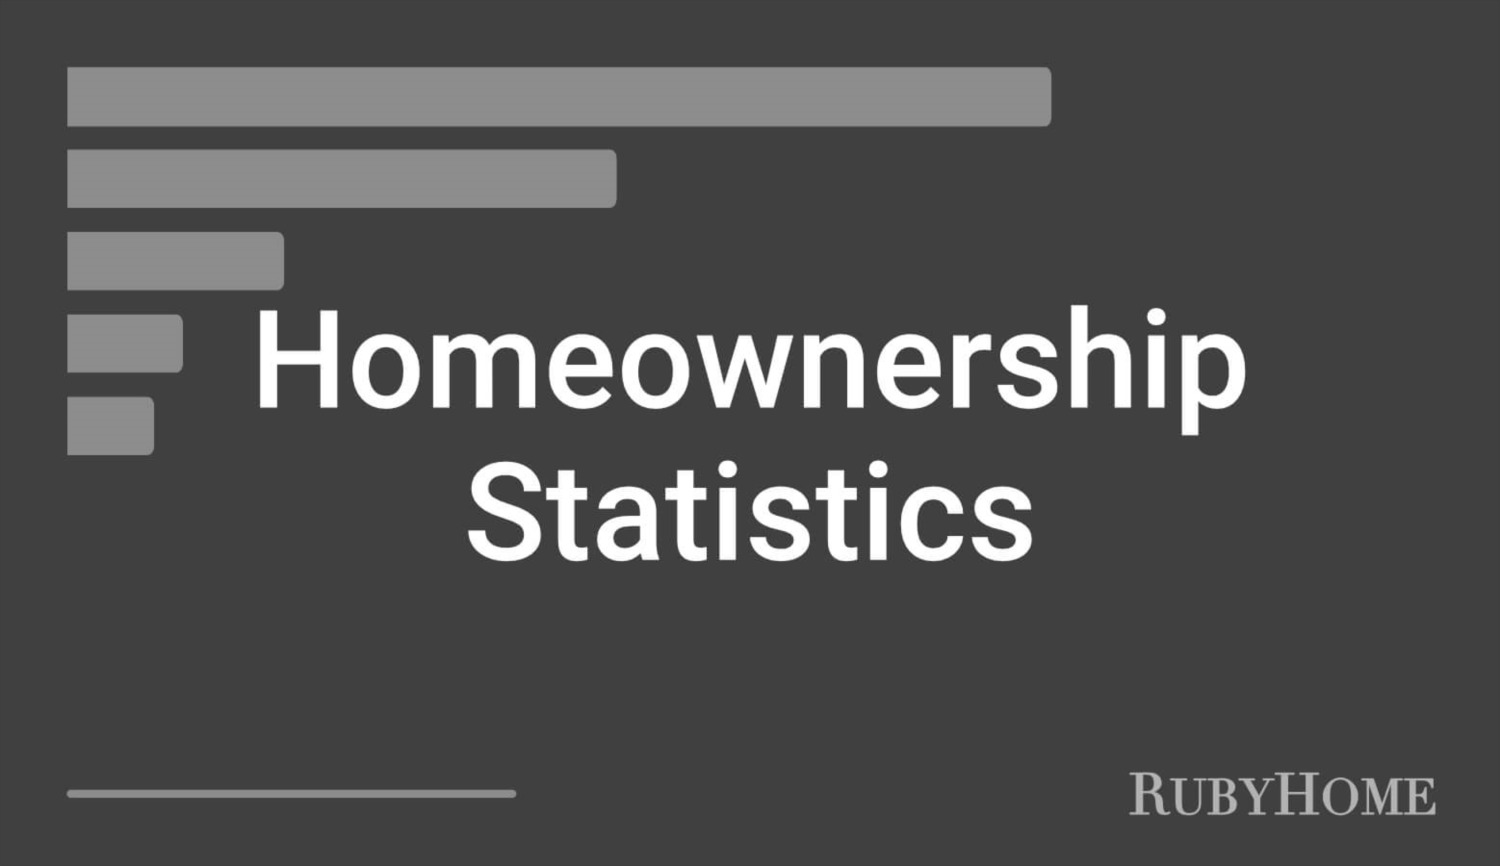 Dive into another installment of RubyHome's real estate stats series about homeownership in the United States. Here you will find out just how common 